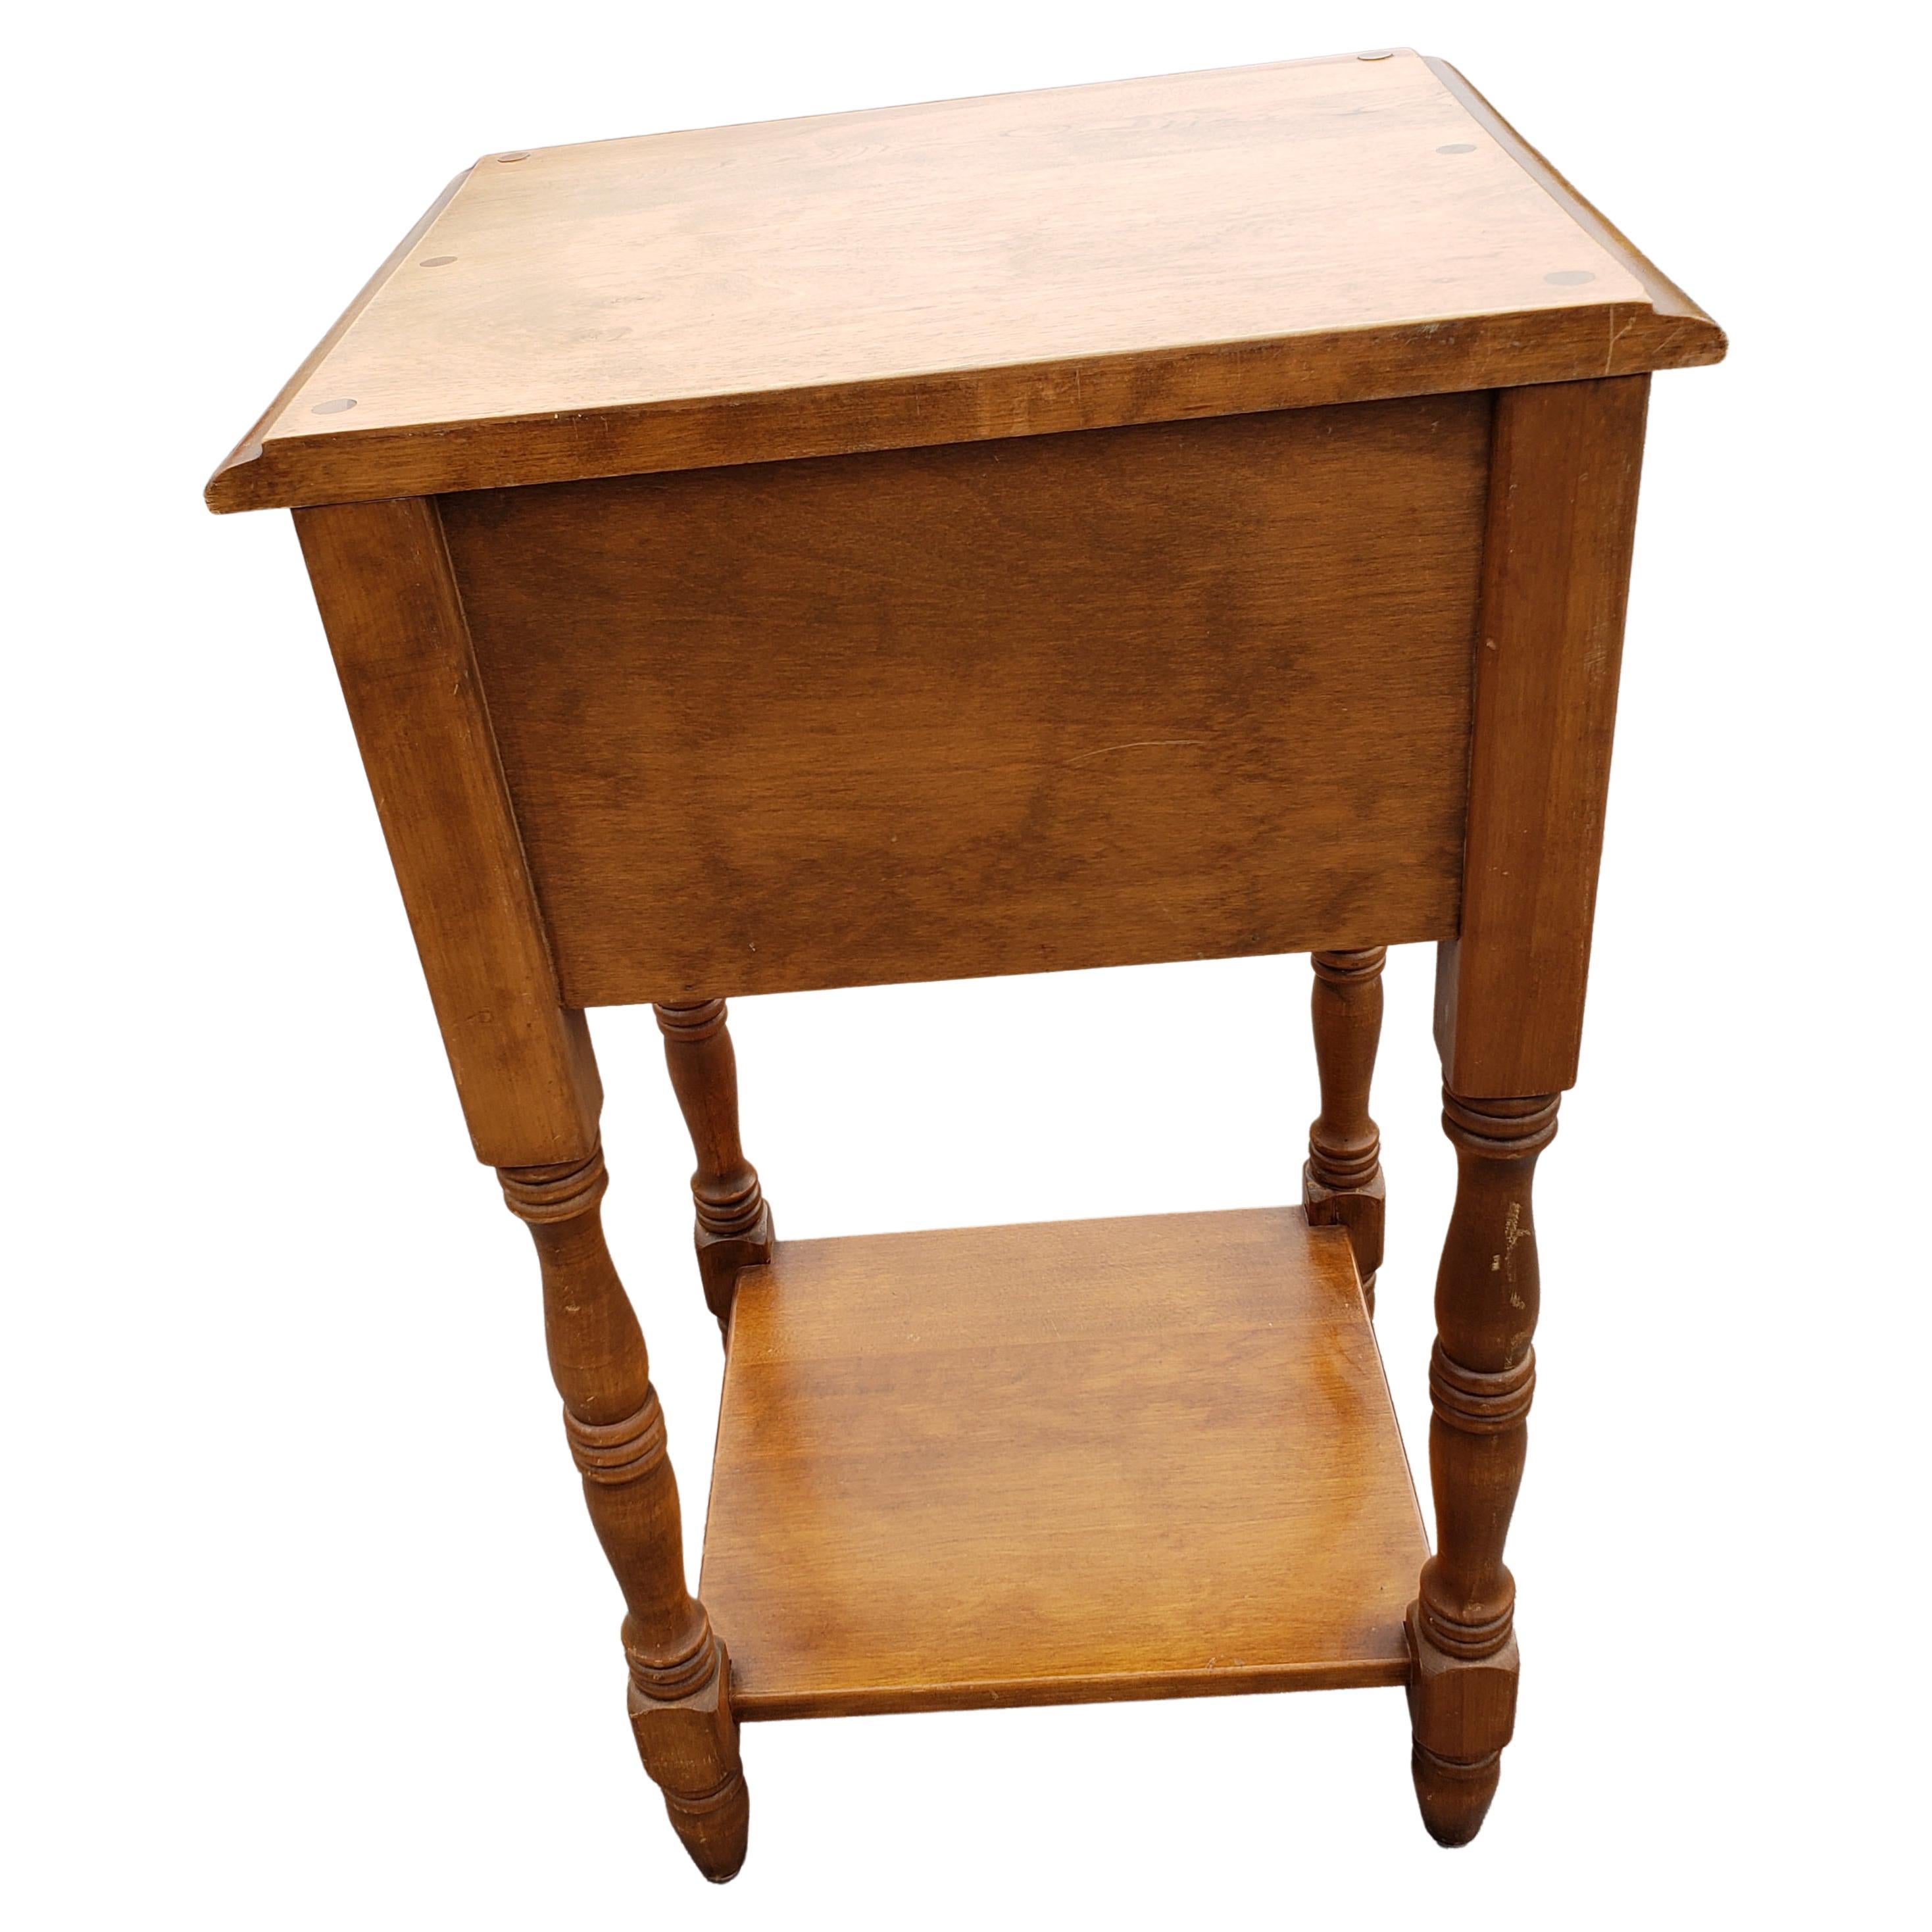 Antique Solid Maple Nightstand Side Table, Circa 1940s In Good Condition For Sale In Germantown, MD